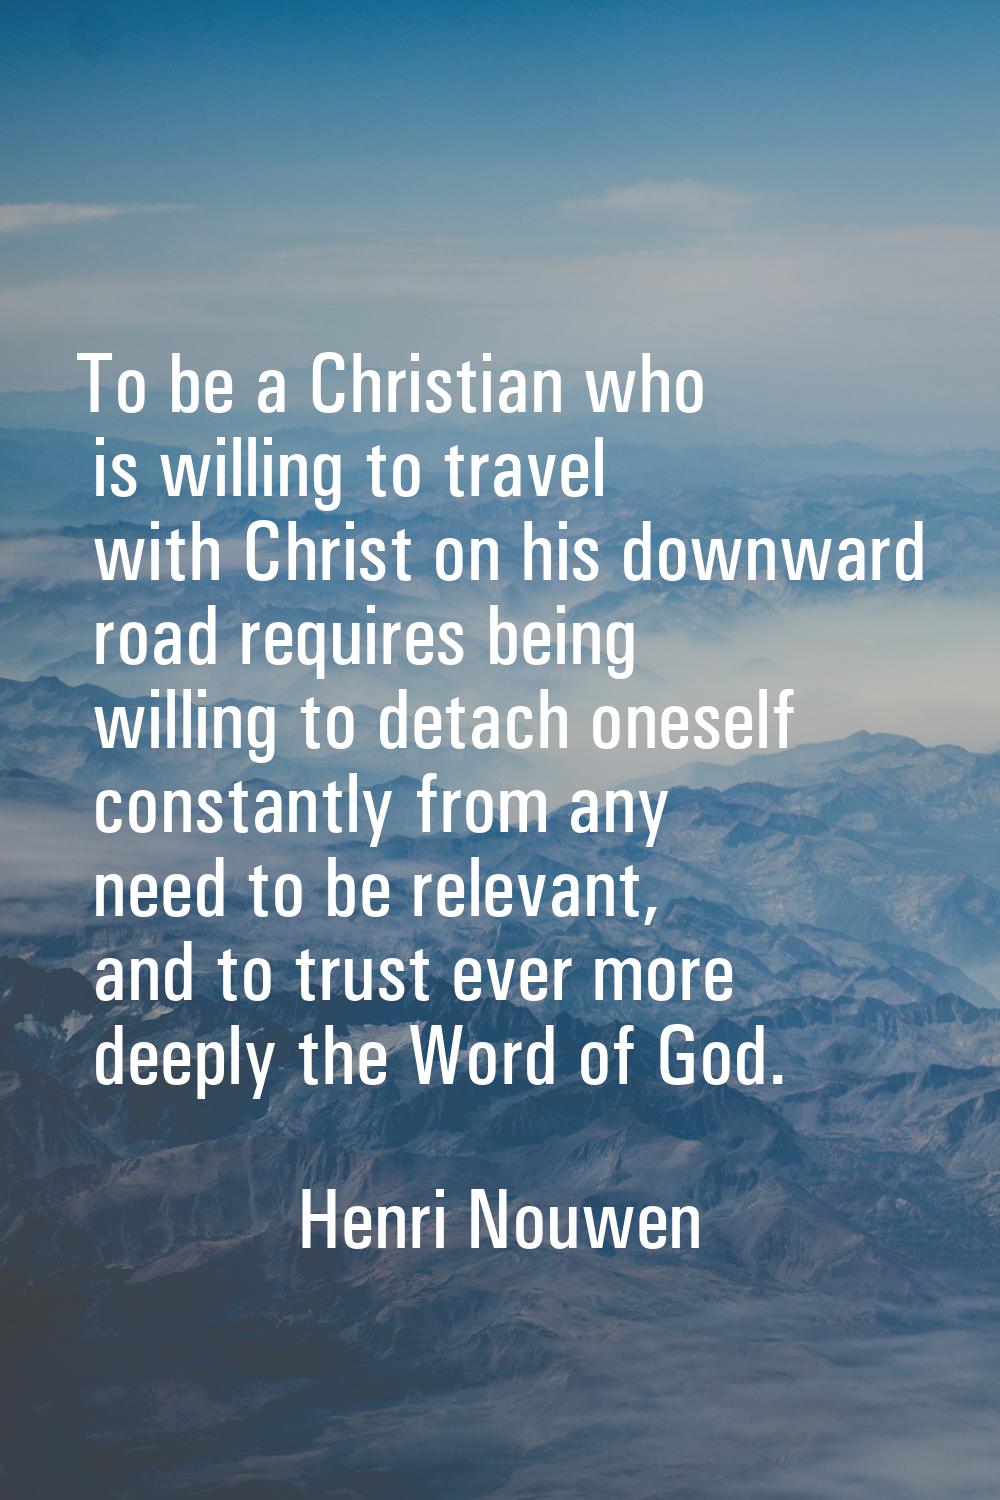 To be a Christian who is willing to travel with Christ on his downward road requires being willing 